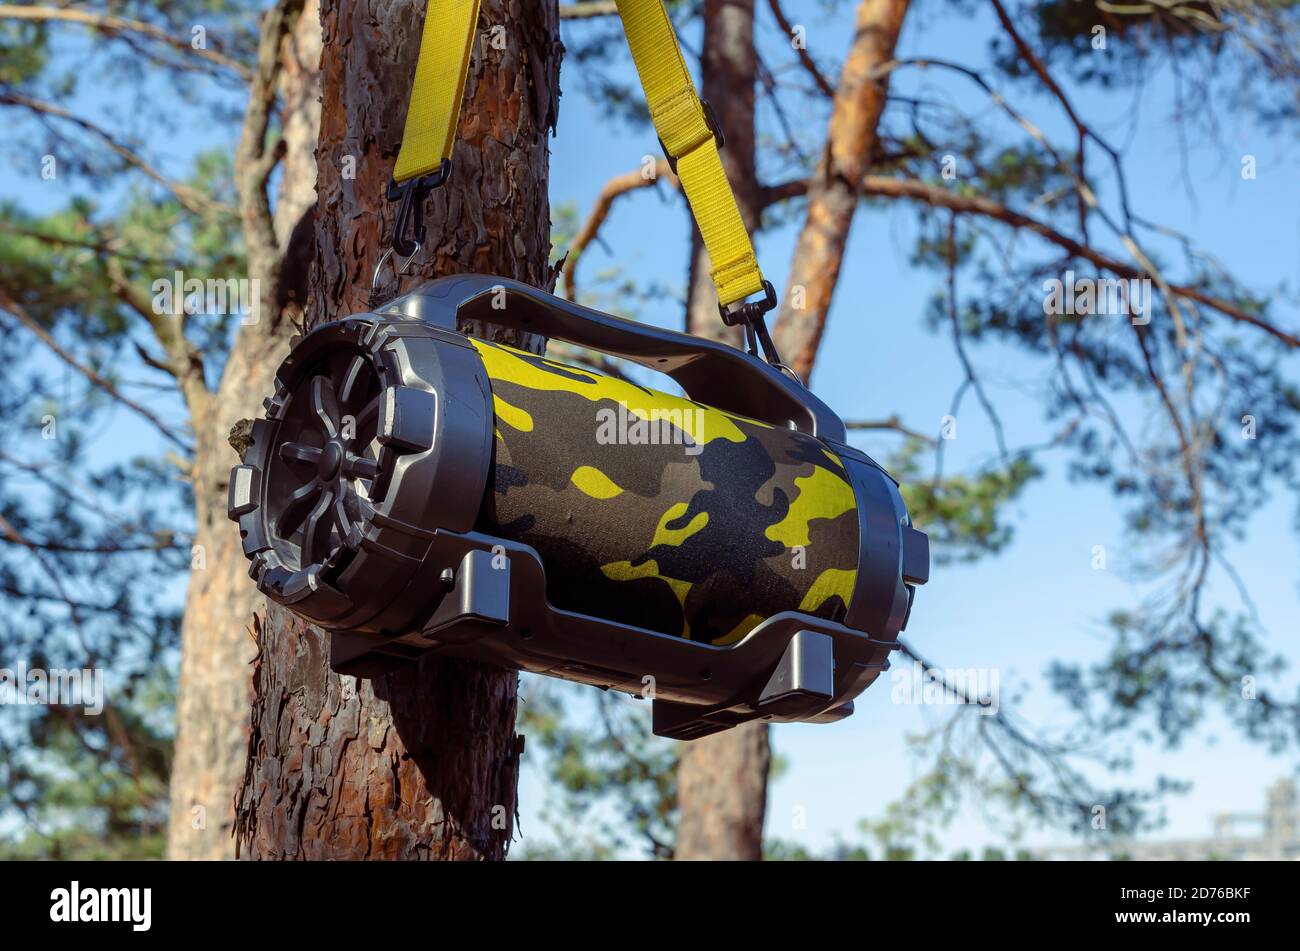 Outdoor Portable Wireless Bluetooth Speaker With Subwoofer Big hanging on  tree in the forest. Acoustic portable speaker camouflage color with yellow  c Stock Photo - Alamy